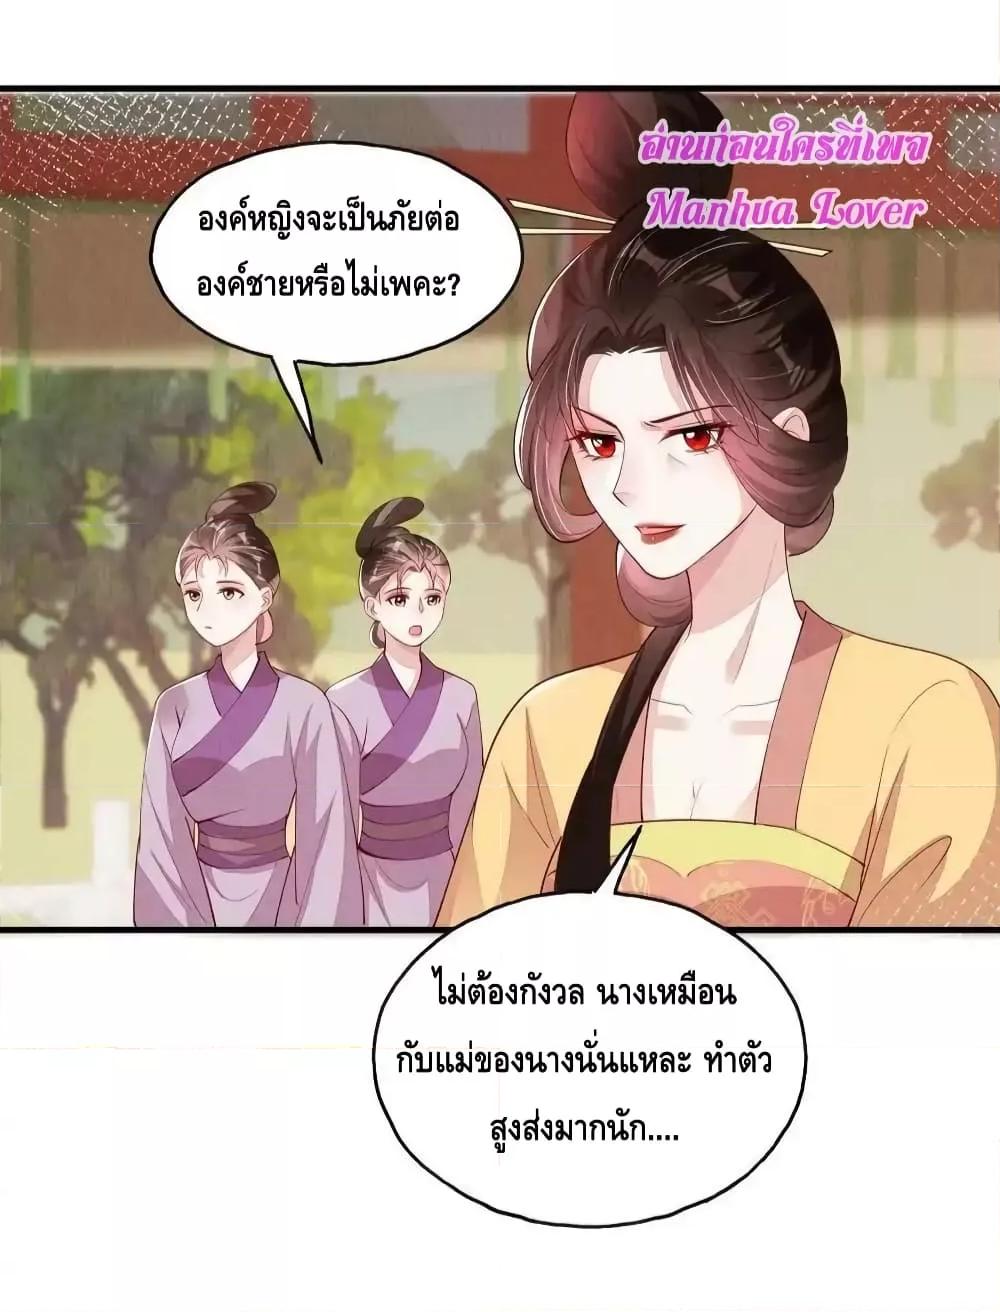 After I Bloom, a Hundred Flowers ตอนที่ 82 (16)